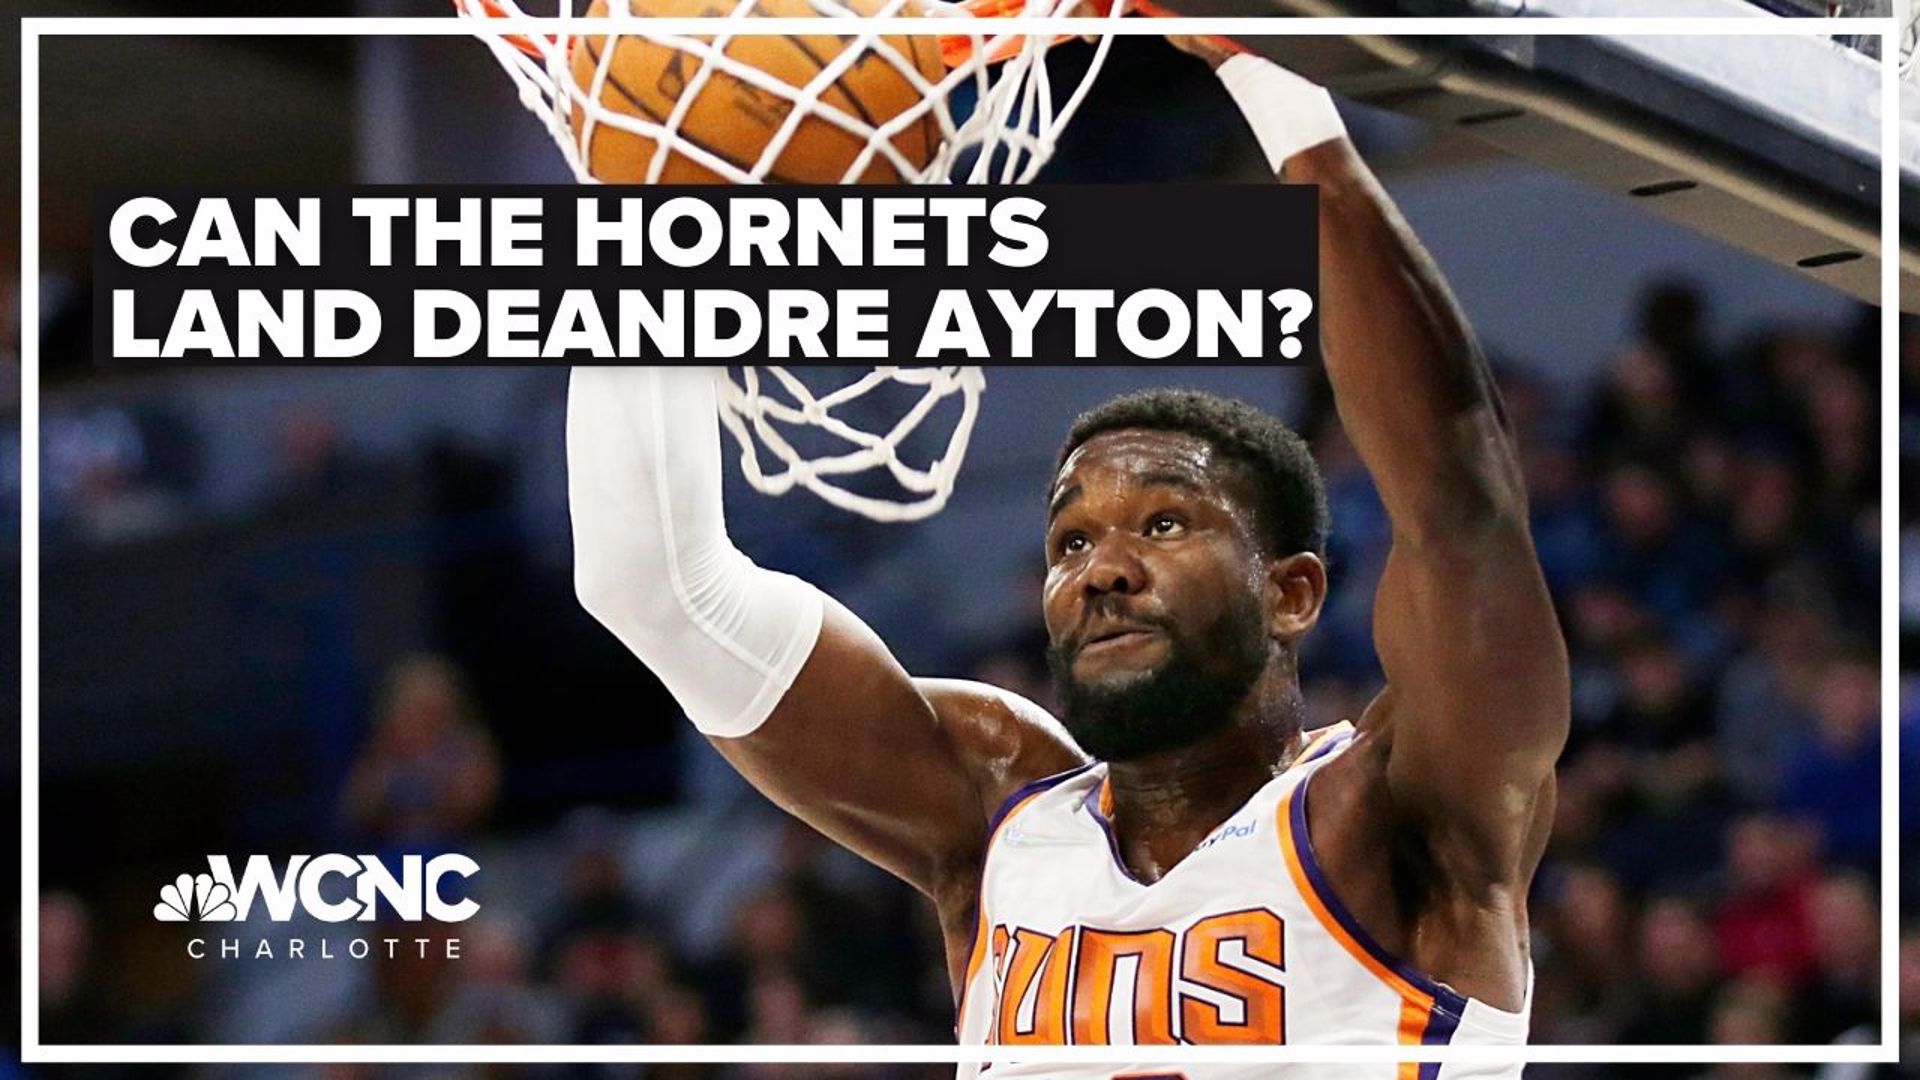 Walker Mehl uses the Suns debacle to the Hornets advantage. Could internal strife lead the Hornets to their next "center" piece?